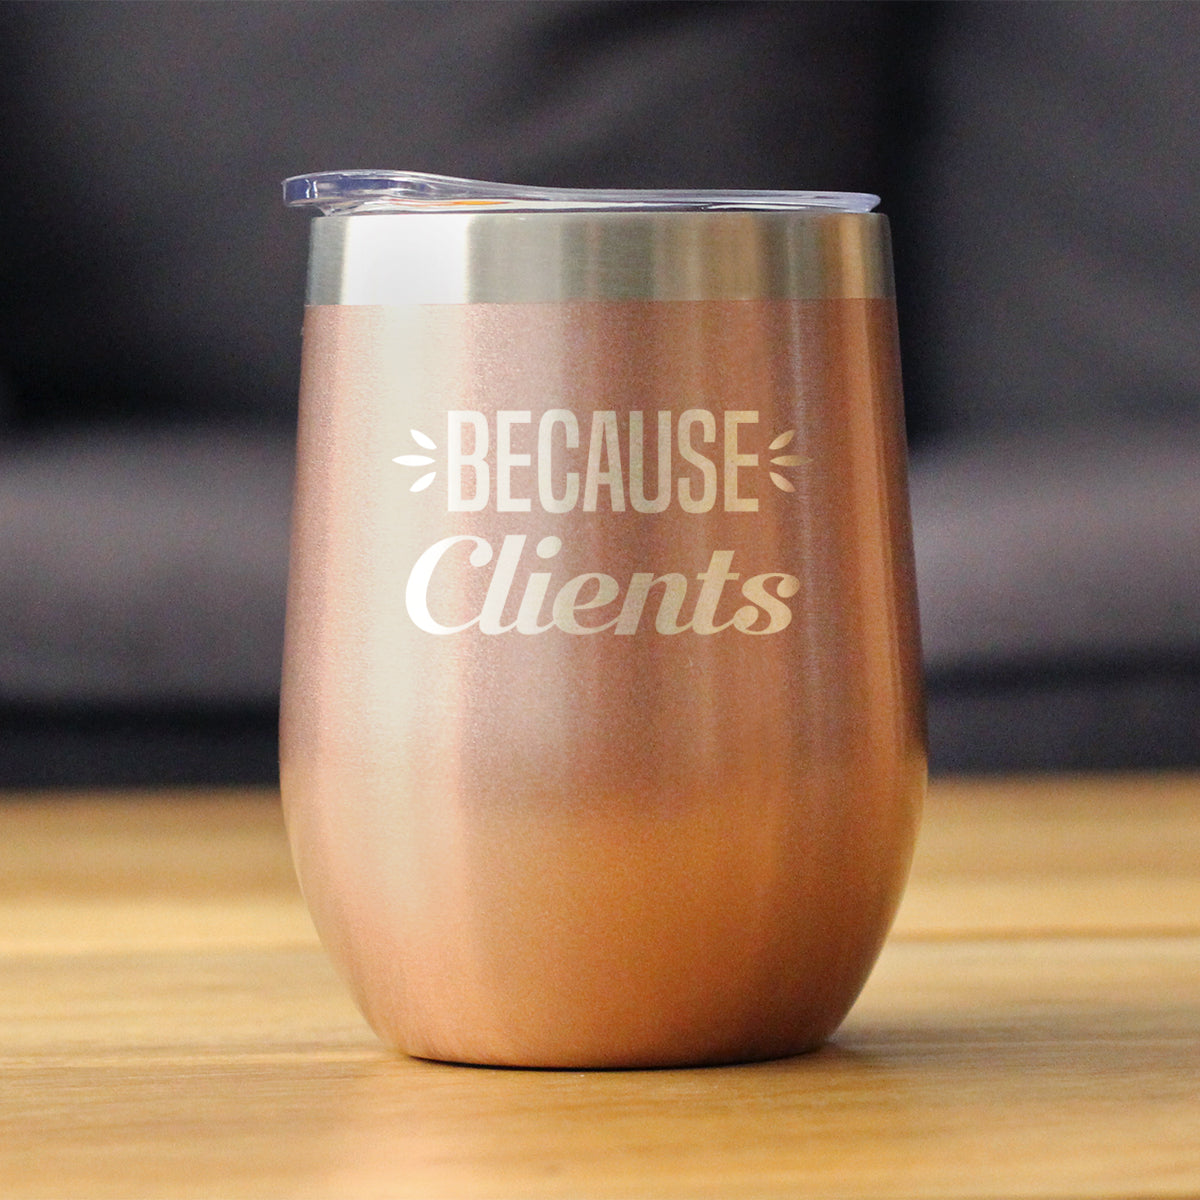 Because Clients - Wine Tumbler Glass with Sliding Lid - Stainless Steel Insulated Mug - Unique Professional Gifts for Coworkers